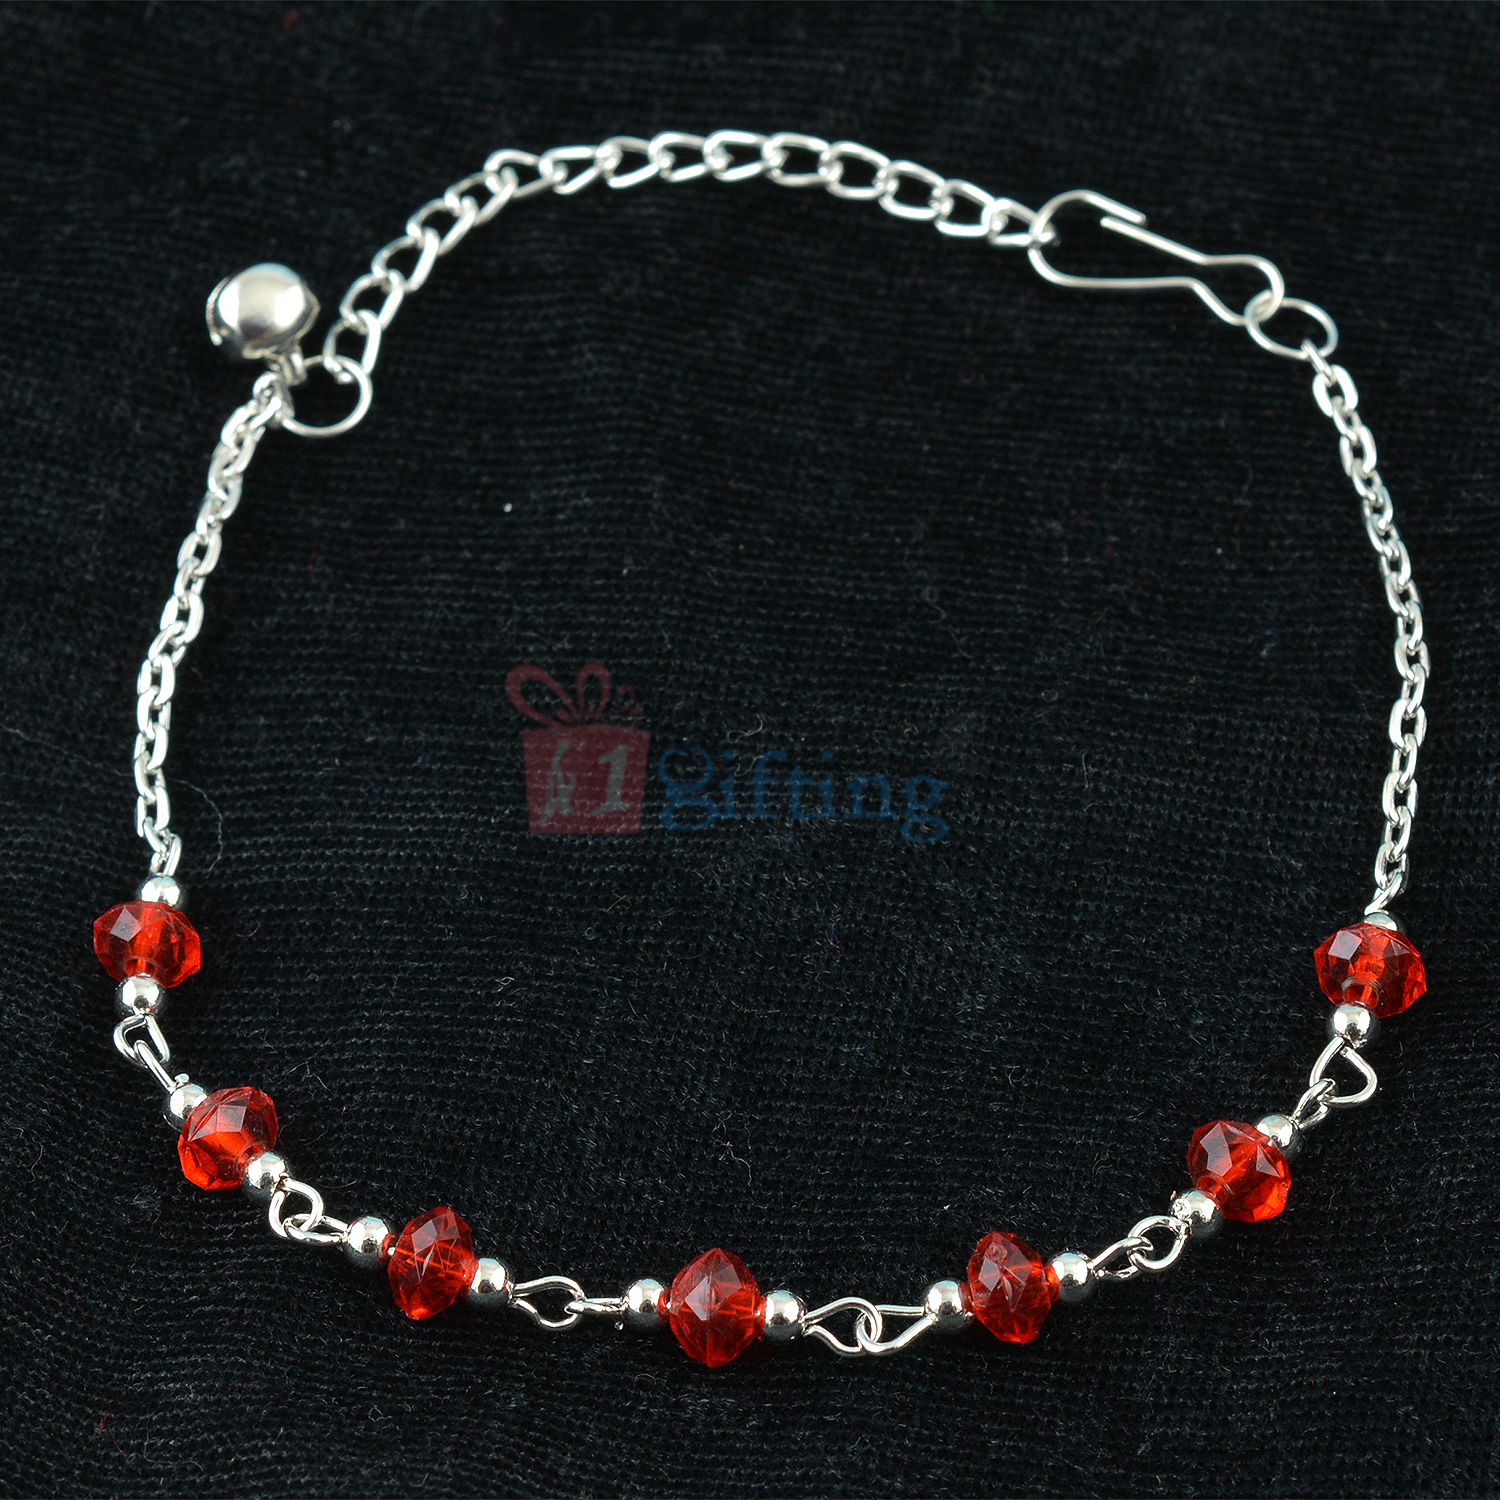 Red Translucent Bead work Silver Chain Bracelet